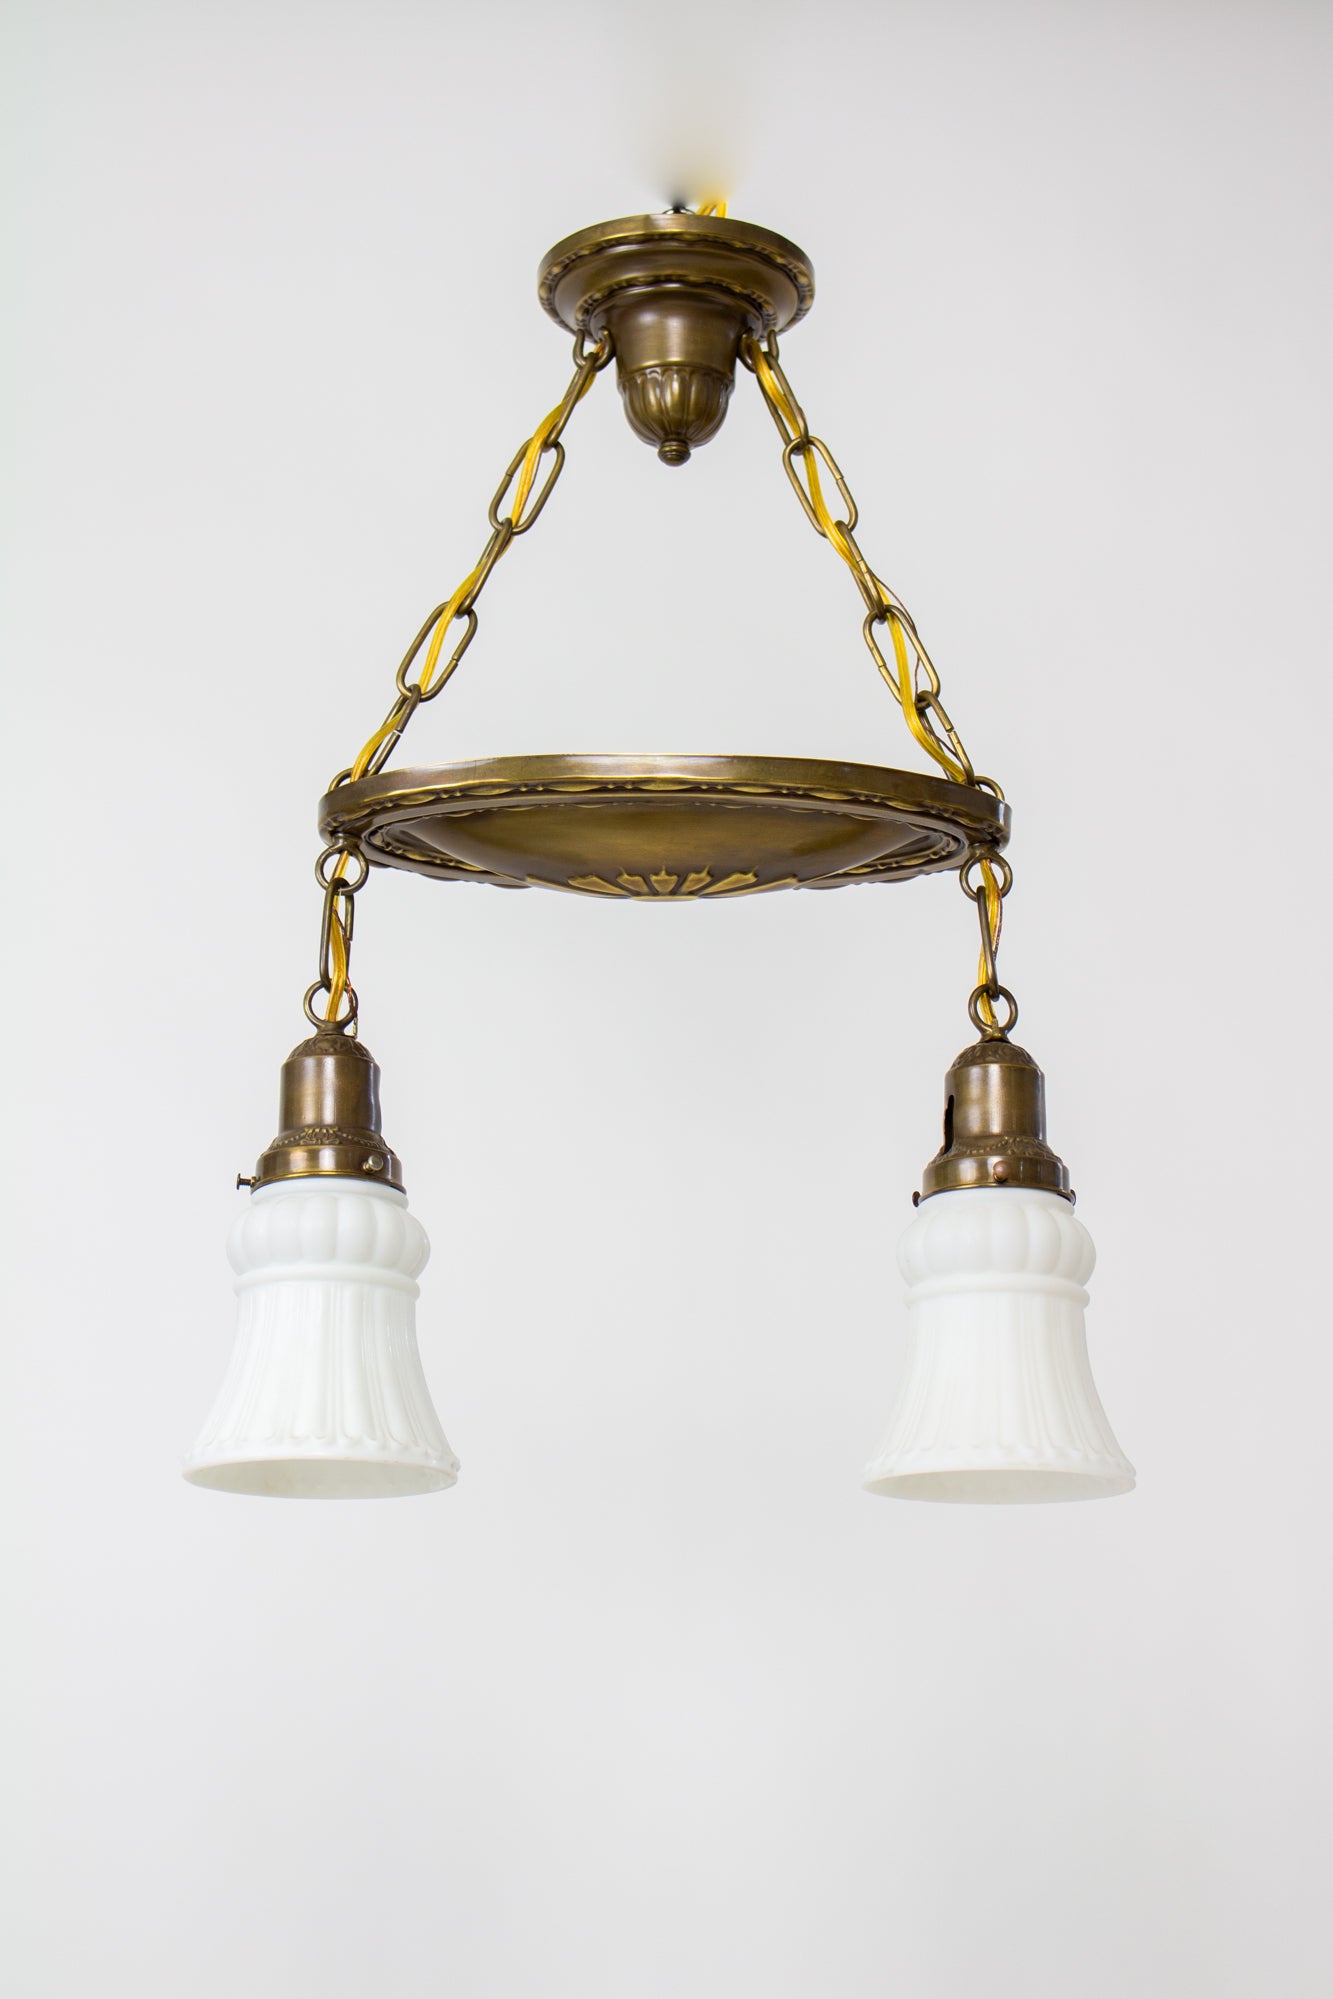 Two Light Pan Fixture For Sale